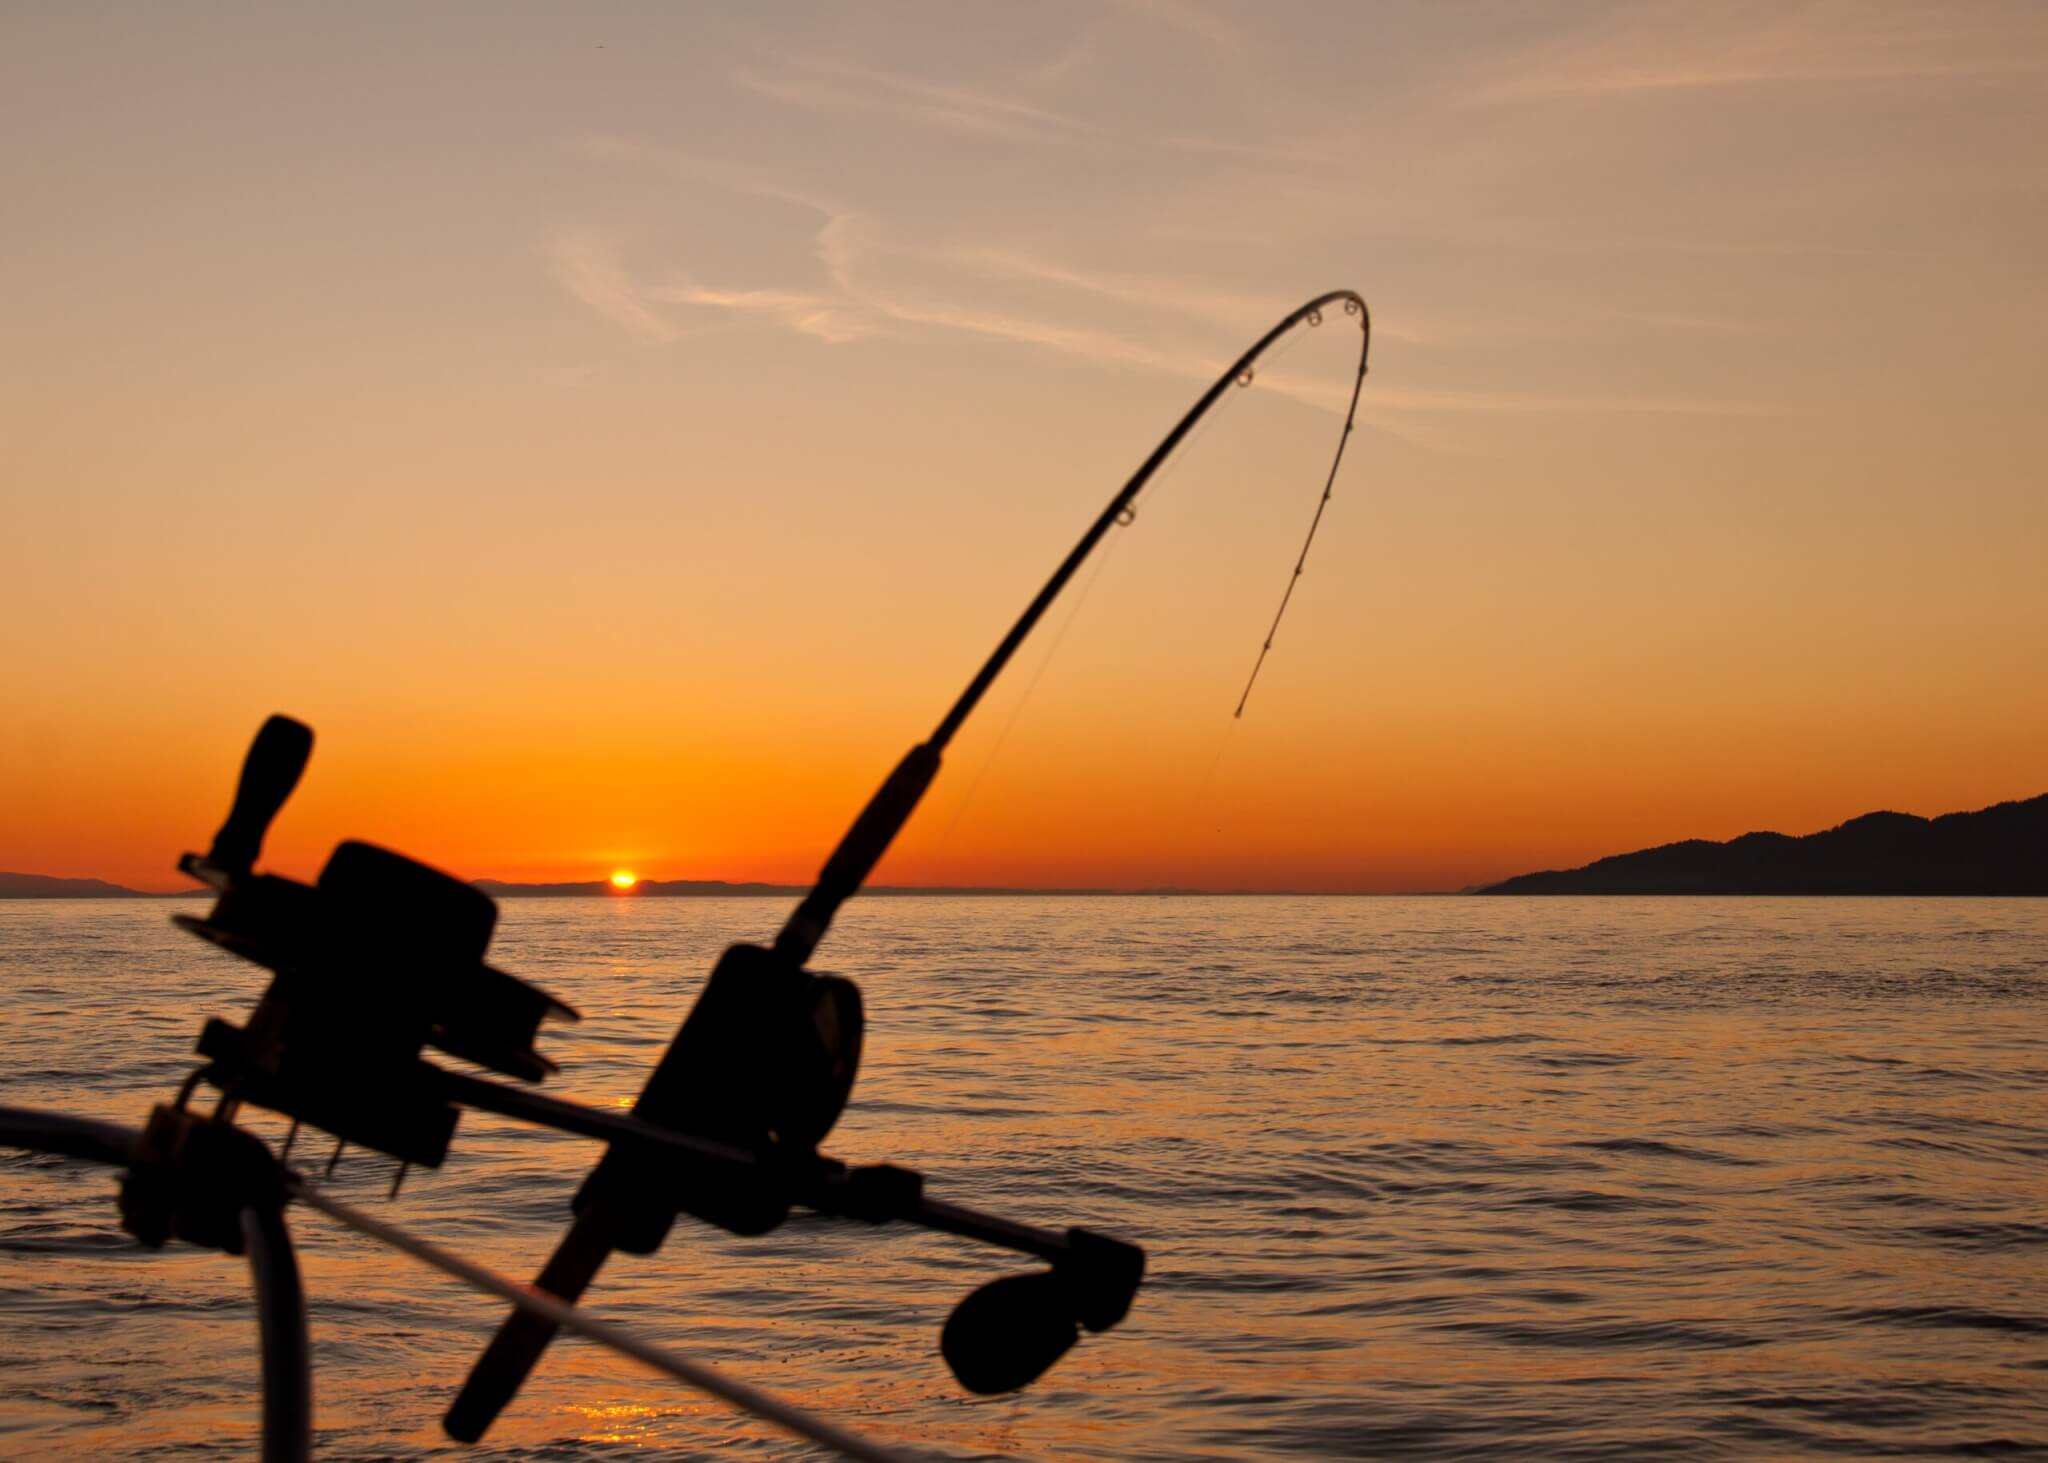 Fishing rod with sunset in the background